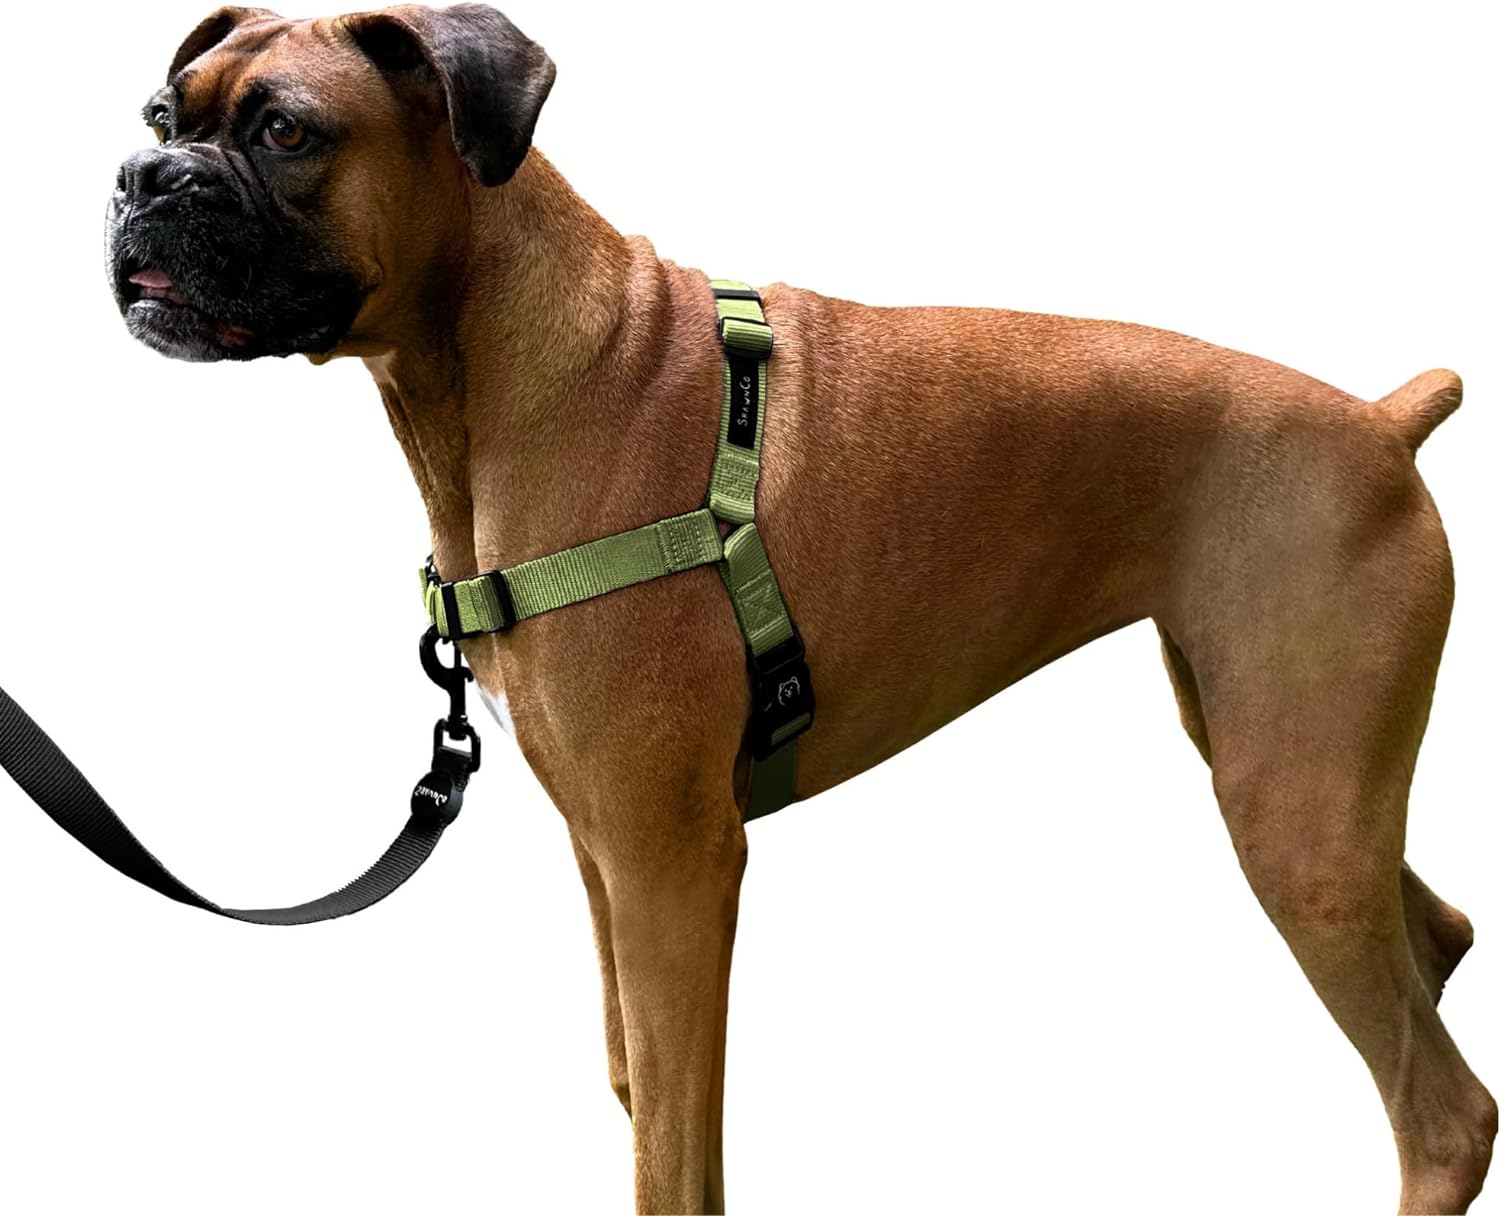 ShawnCo Dream Walk No-Pull Dog Harness- Adjustable, Comfortable, Easy to Use Pet Halter to Help Stop Pulling for Small, Medium and Large Dogs (Olive Green, M)